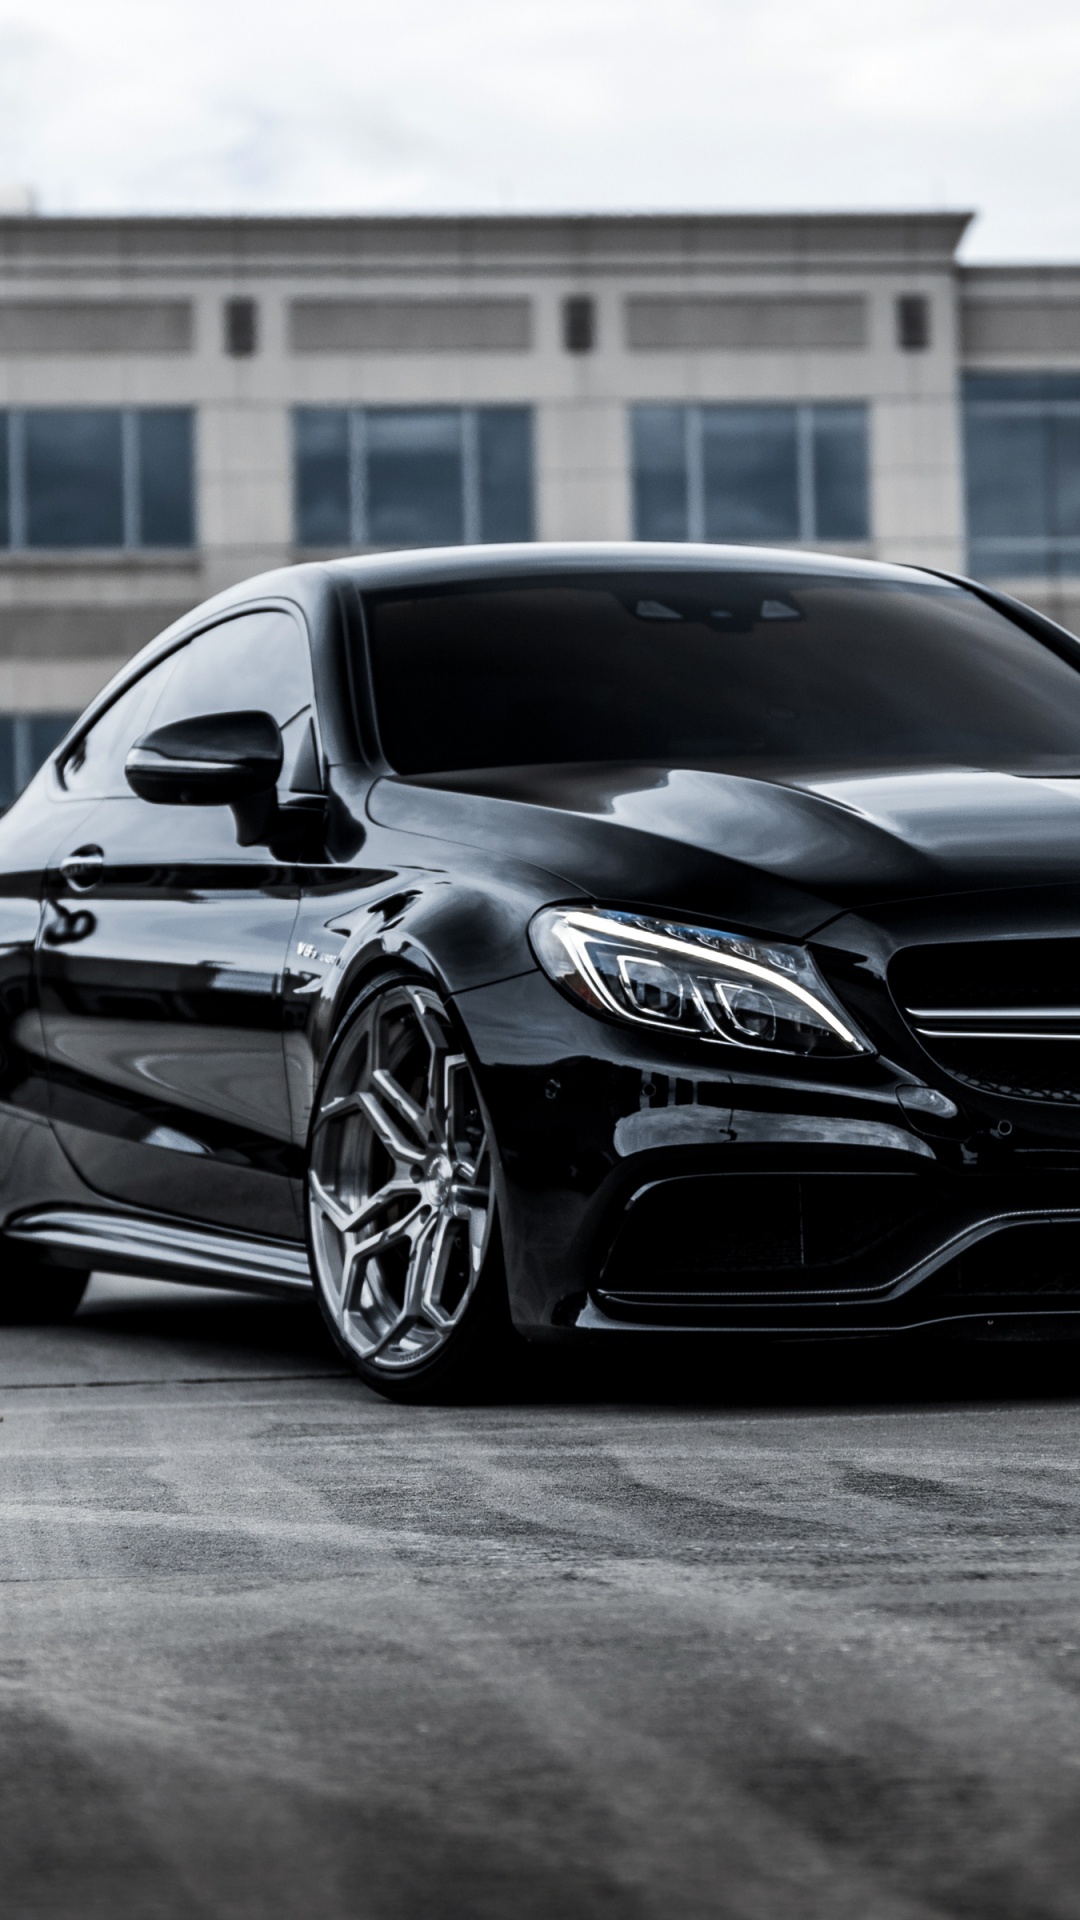 Black Mercedes Benz Coupe in a Room. Wallpaper in 1080x1920 Resolution